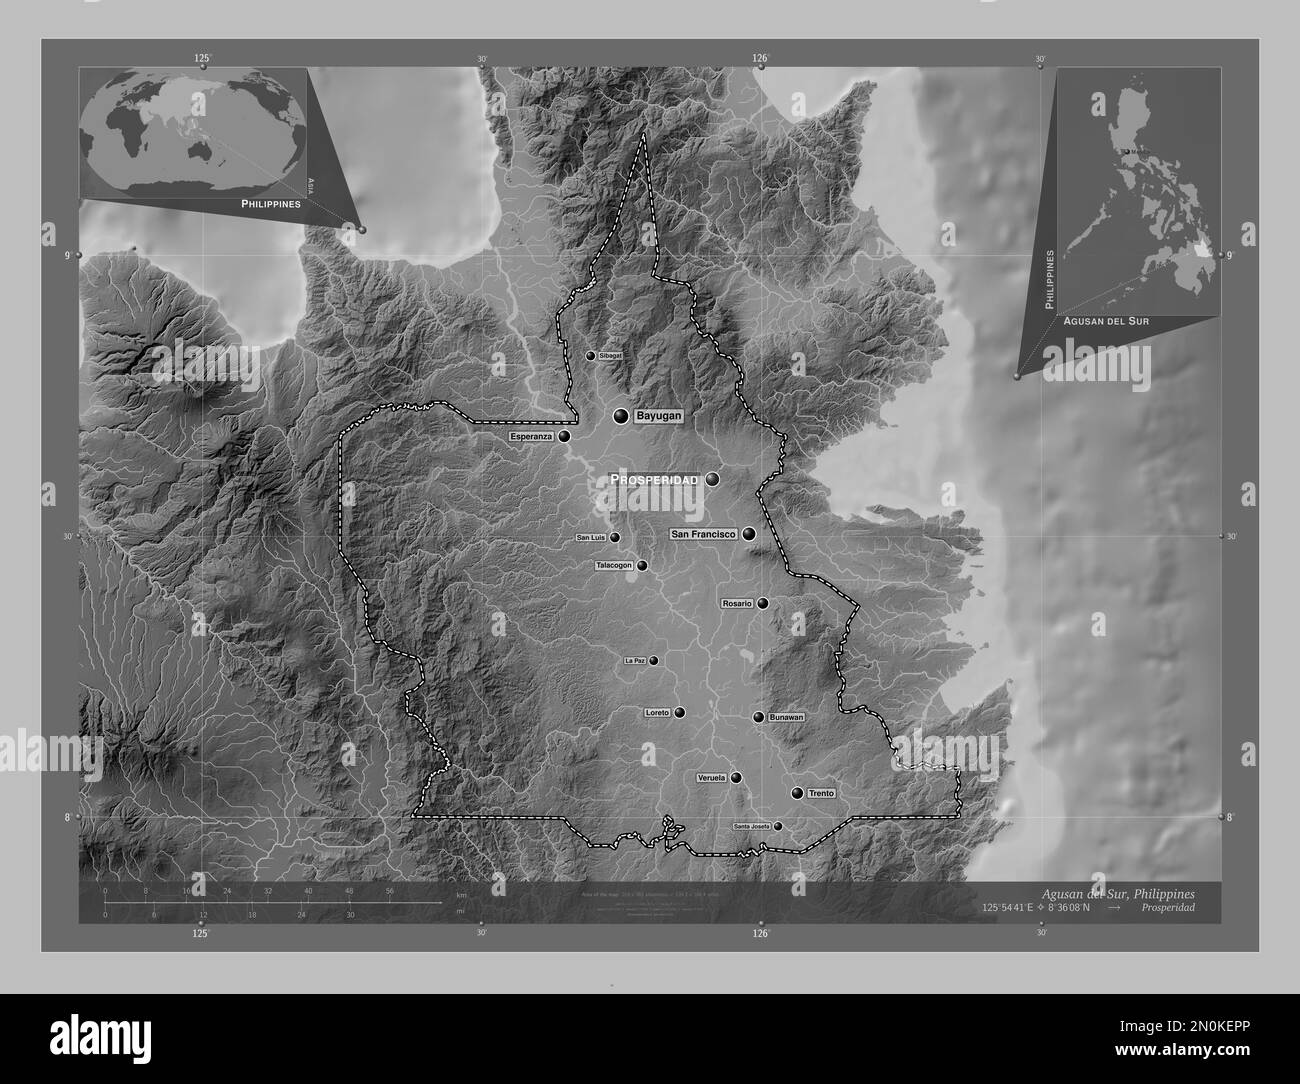 Agusan del Sur, province of Philippines. Grayscale elevation map with lakes and rivers. Locations and names of major cities of the region. Corner auxi Stock Photo